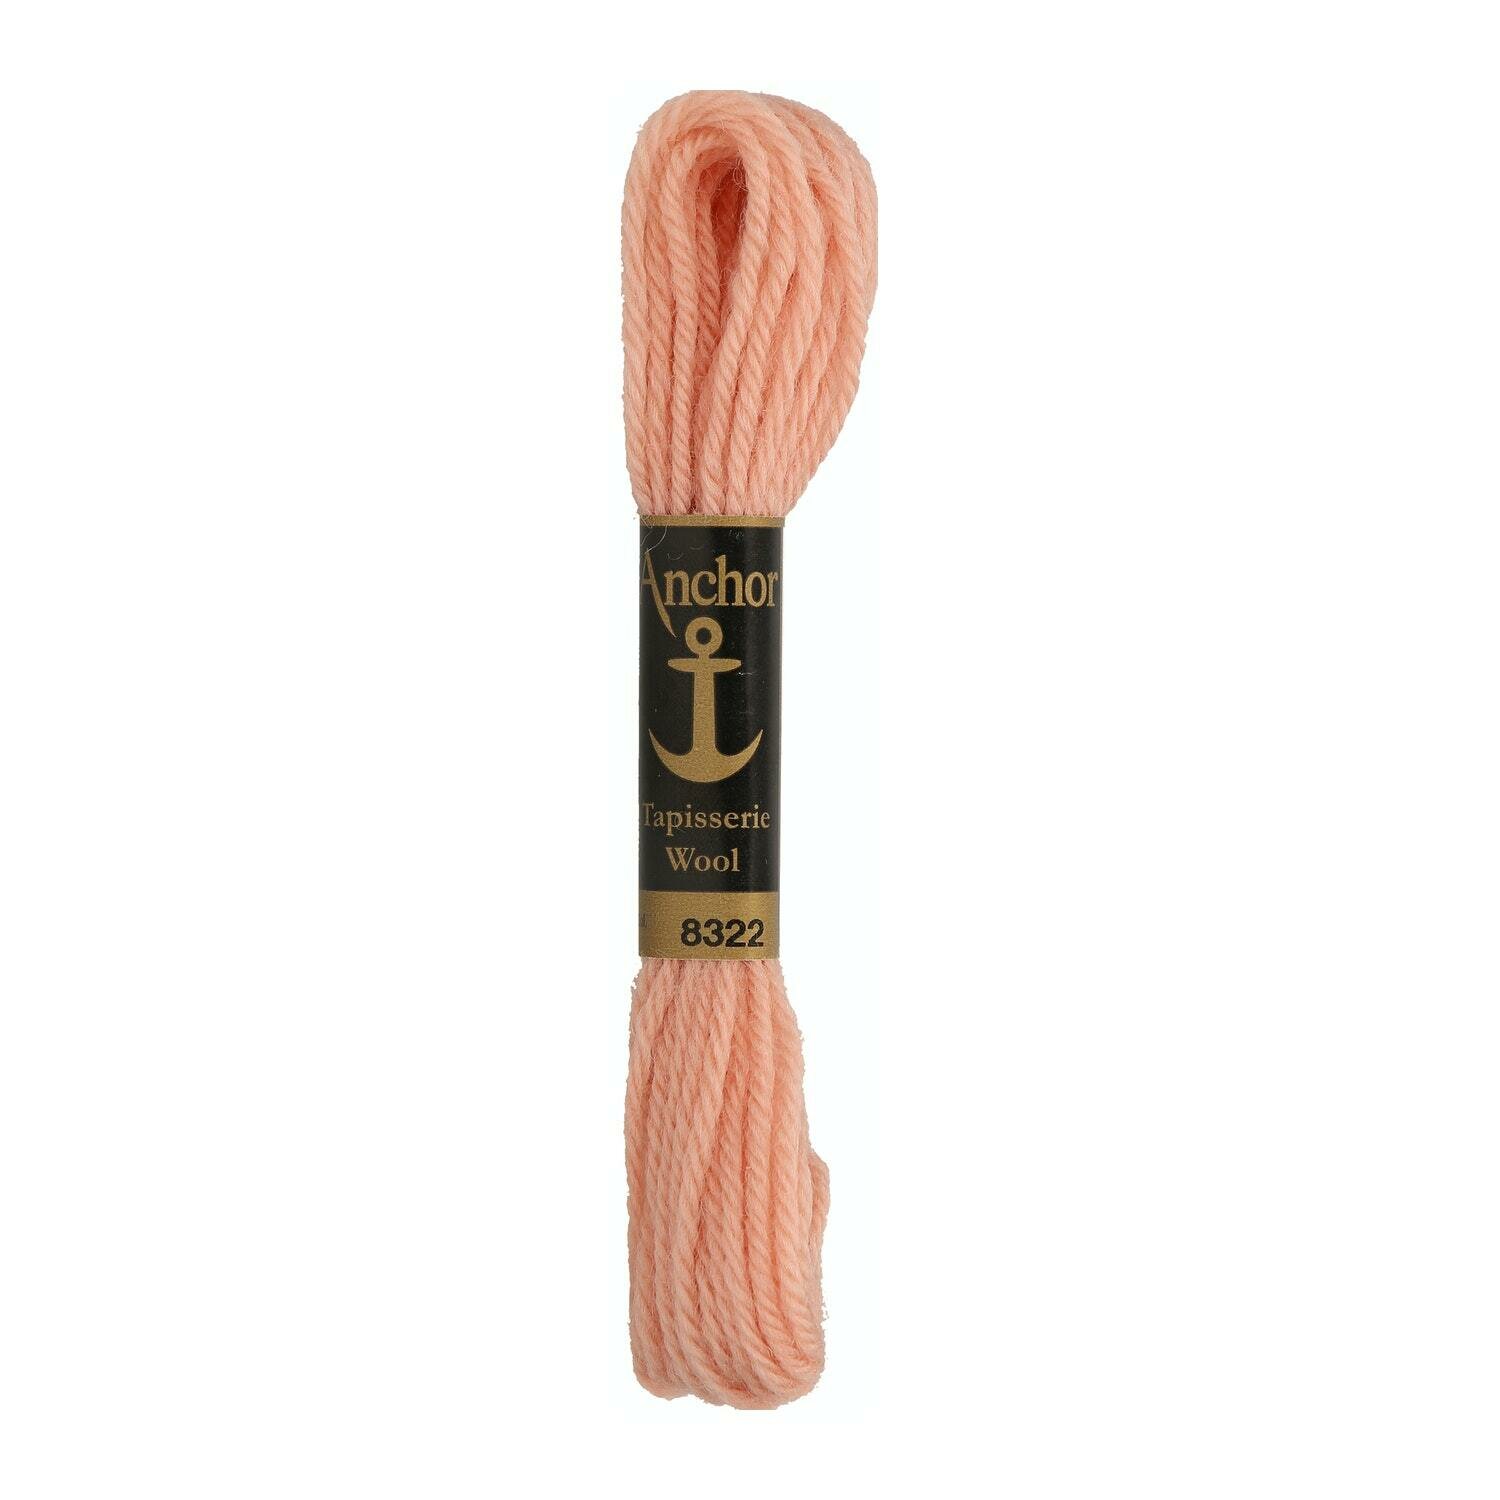 Anchor Tapisserie Wool #  08322